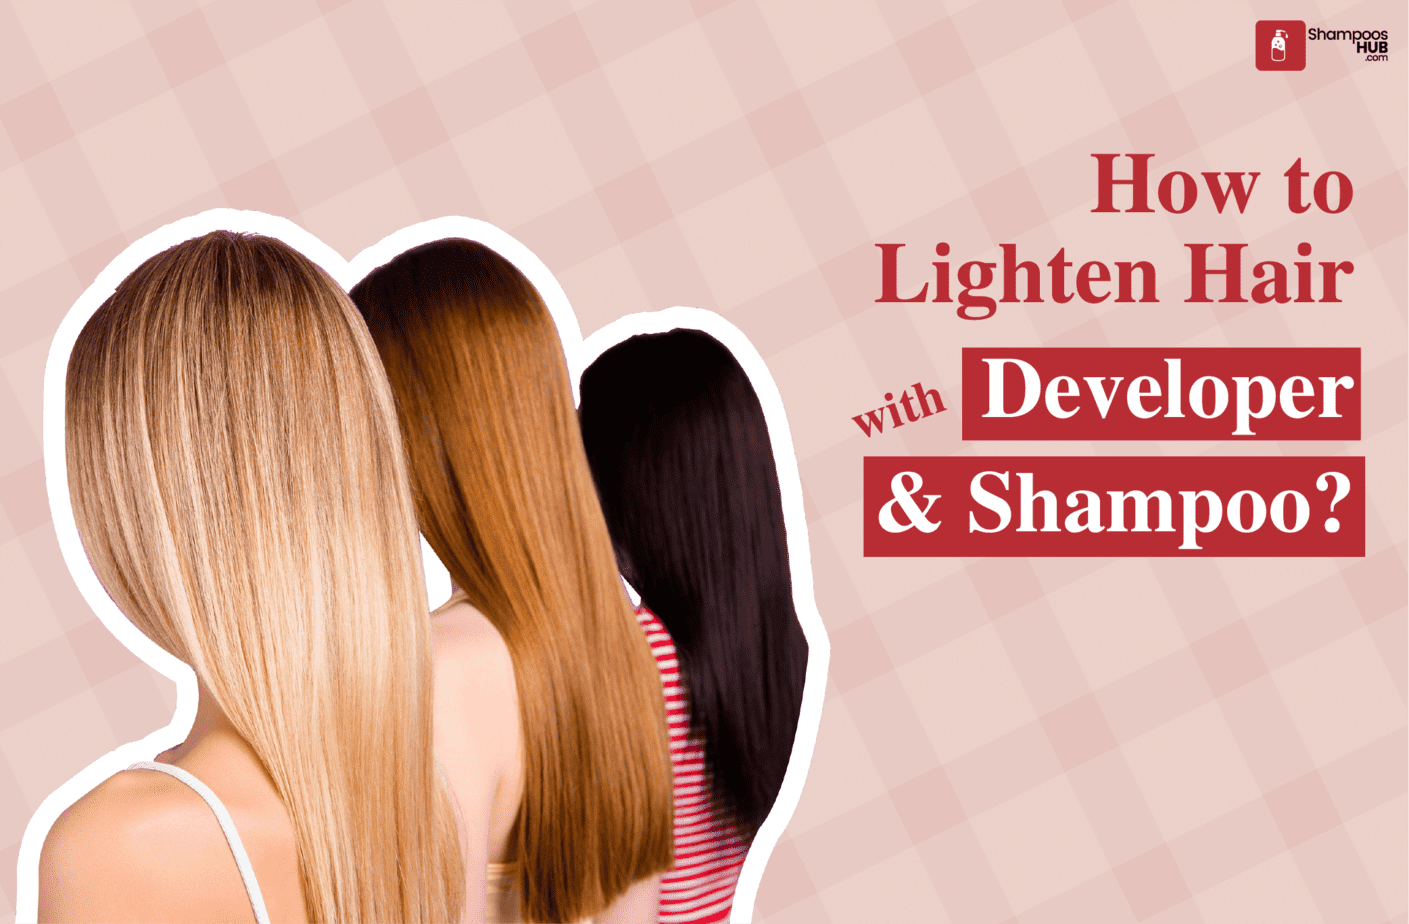 How to Lighten Hair with Developer and Shampoo?